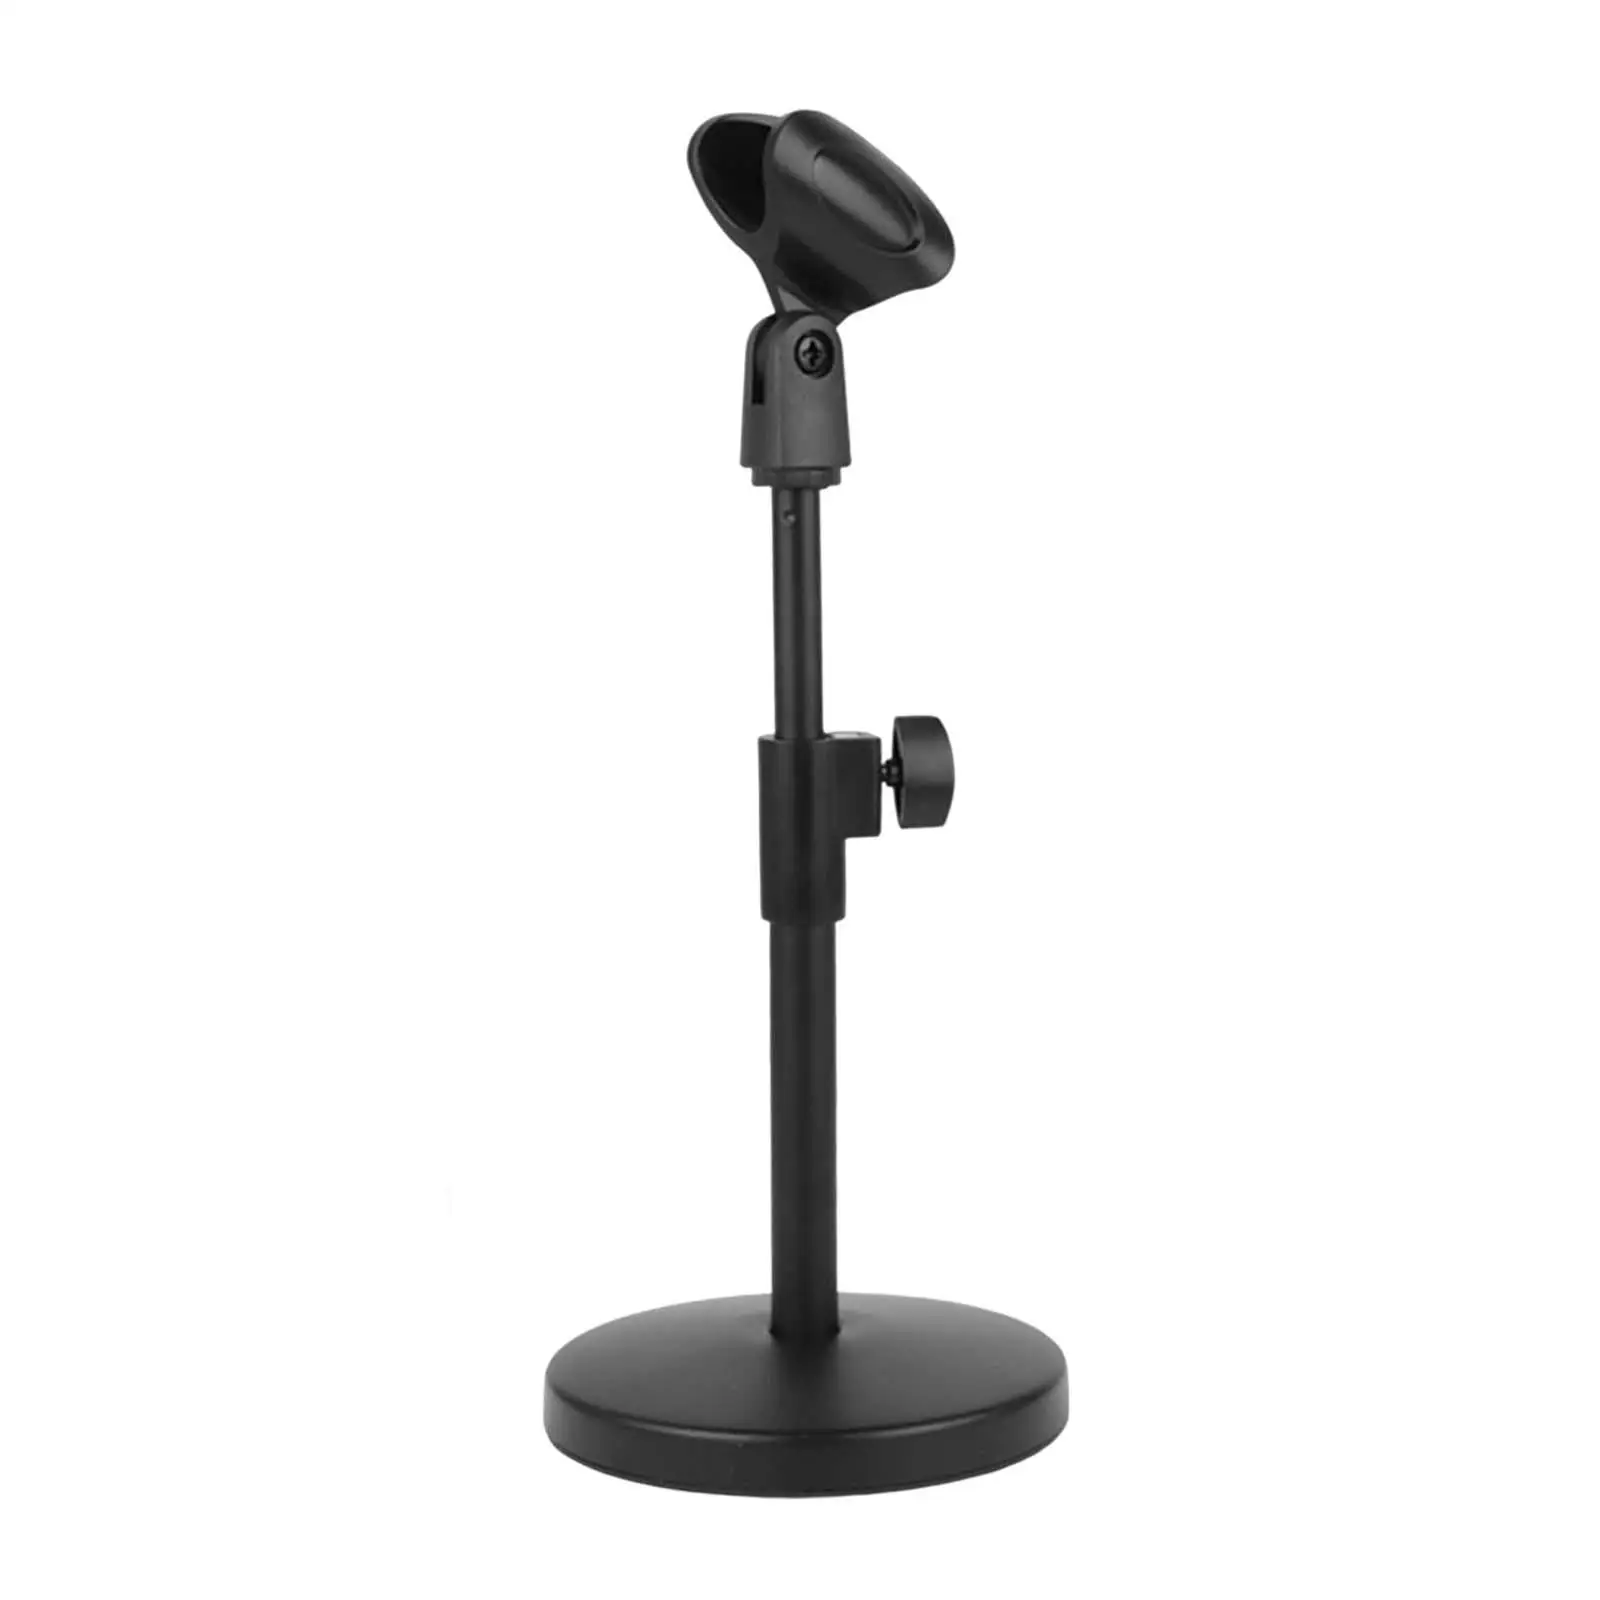 Desktop Microphone Stand Holder Adjustable Height Universal Durable Sturdy Mini Table Microphone Stand for Broadcasting Meeting